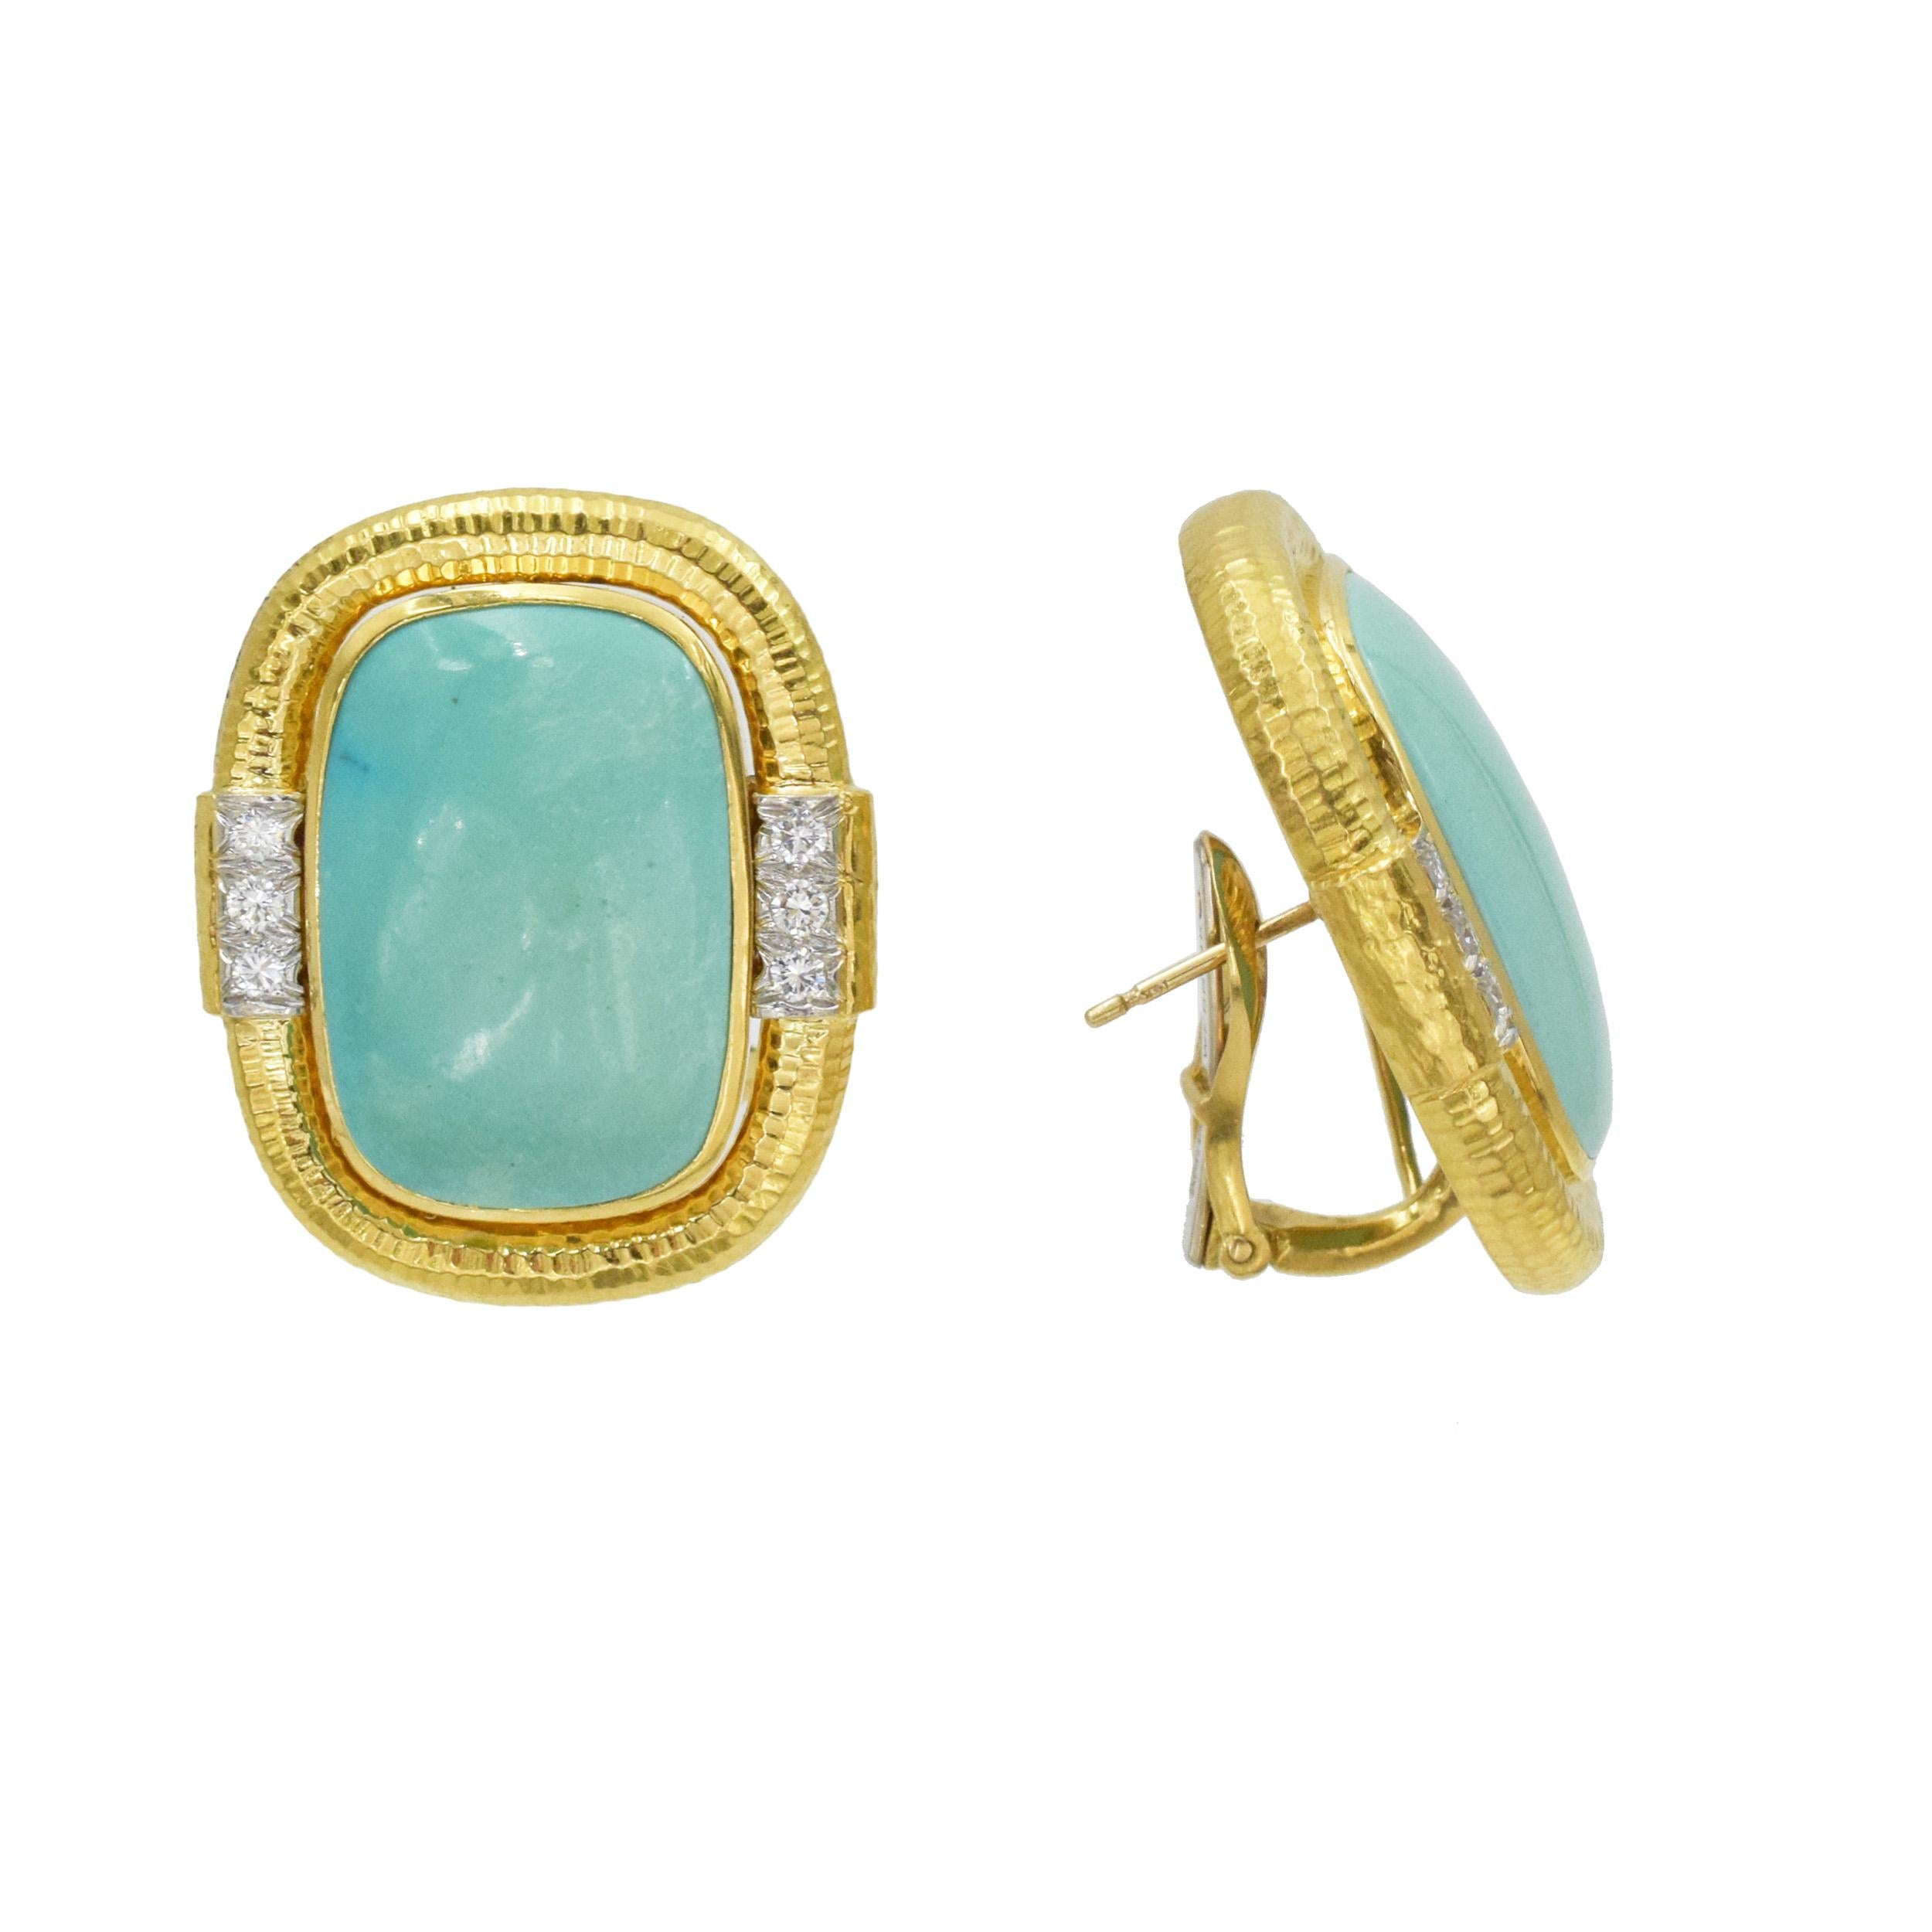 Cabochon David Webb Turquoise and Diamond 18karat Yellow Gold and Platinum Earrings For Sale